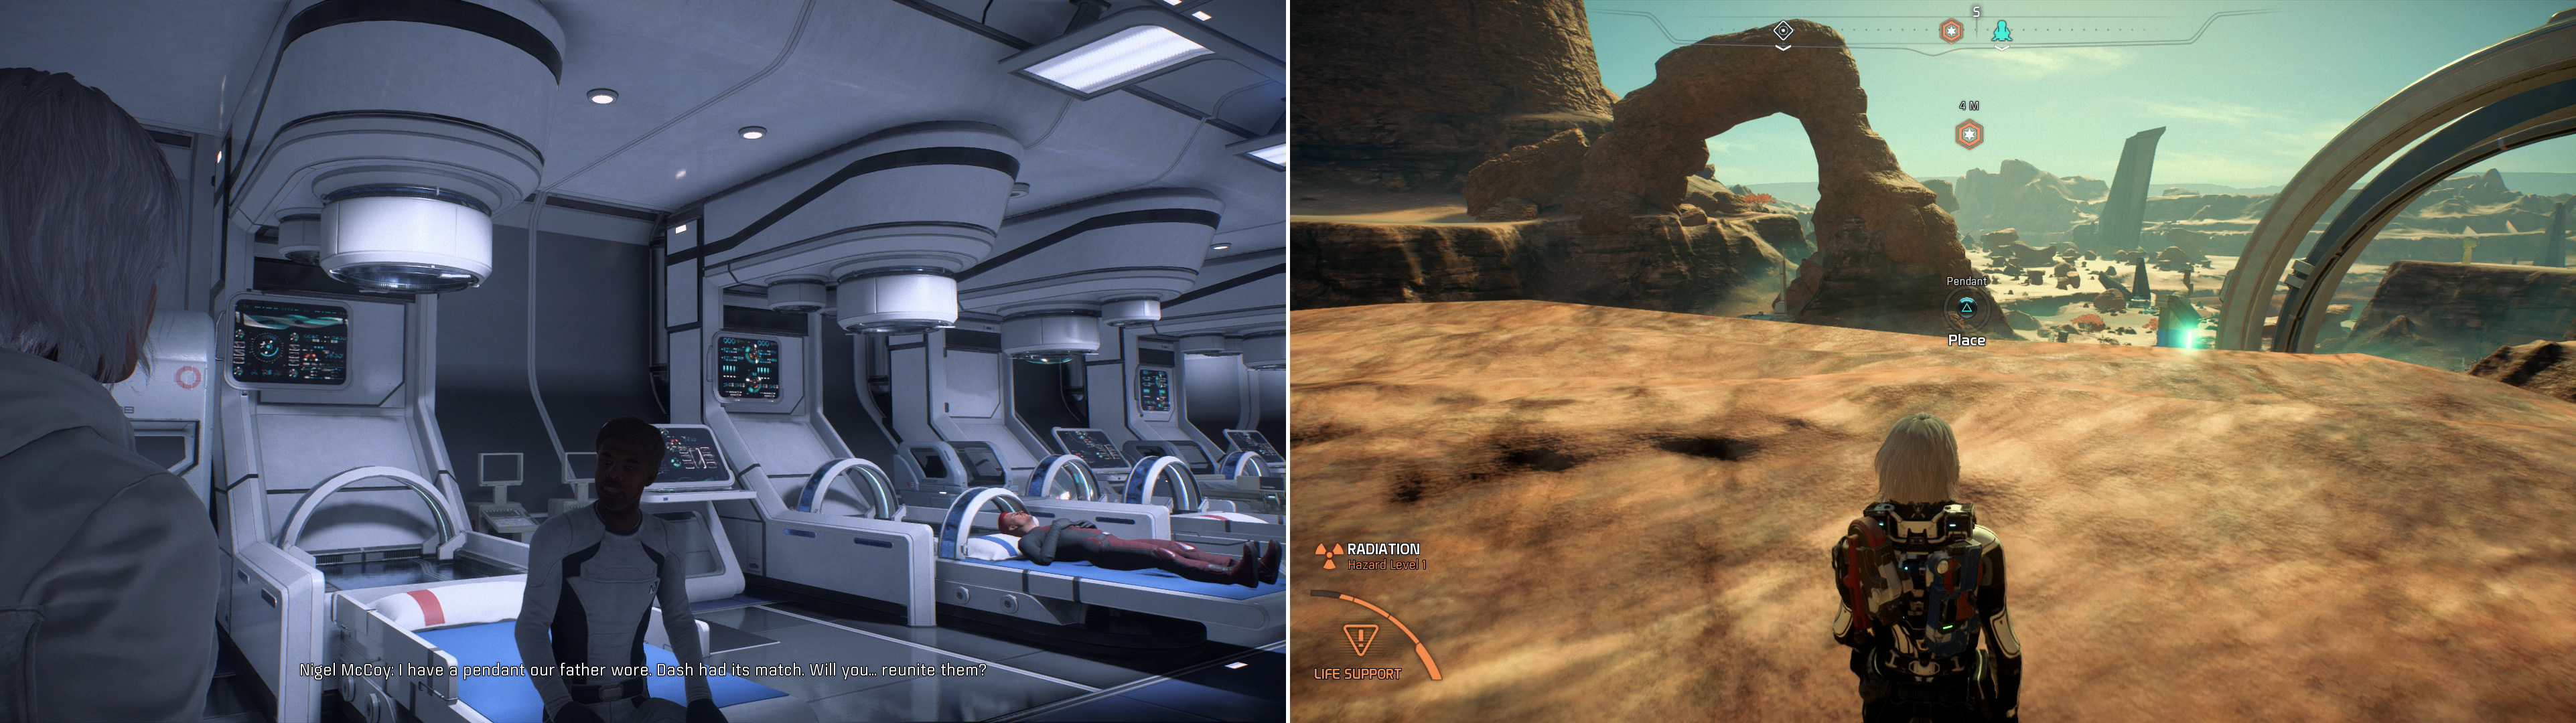 Talk to Nigel McCoy on the Hyperion (left) then fulfill his wishes and reuinite his pendant with his brothers on a hill overlooking Site 1 (right).